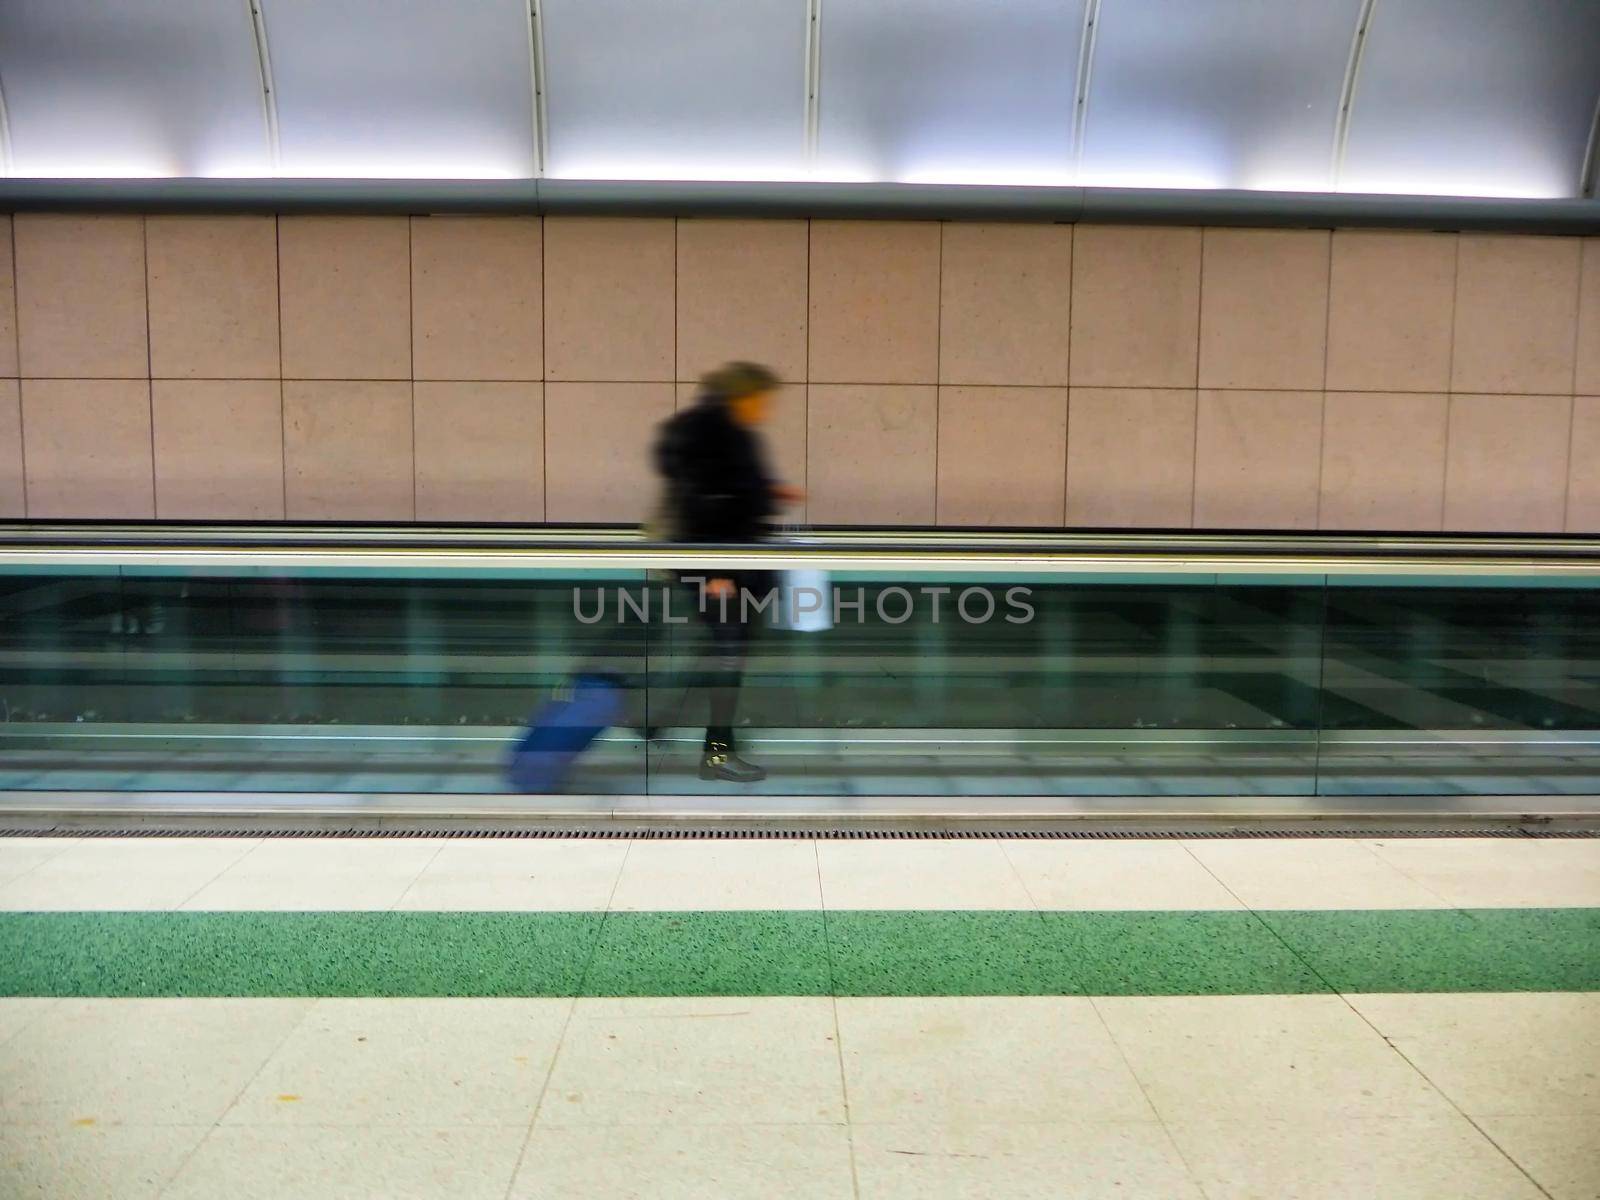 Unrecognizable traveler on hurry motion effect of blurred person alone Milan Italy February 5 2020 by lemar